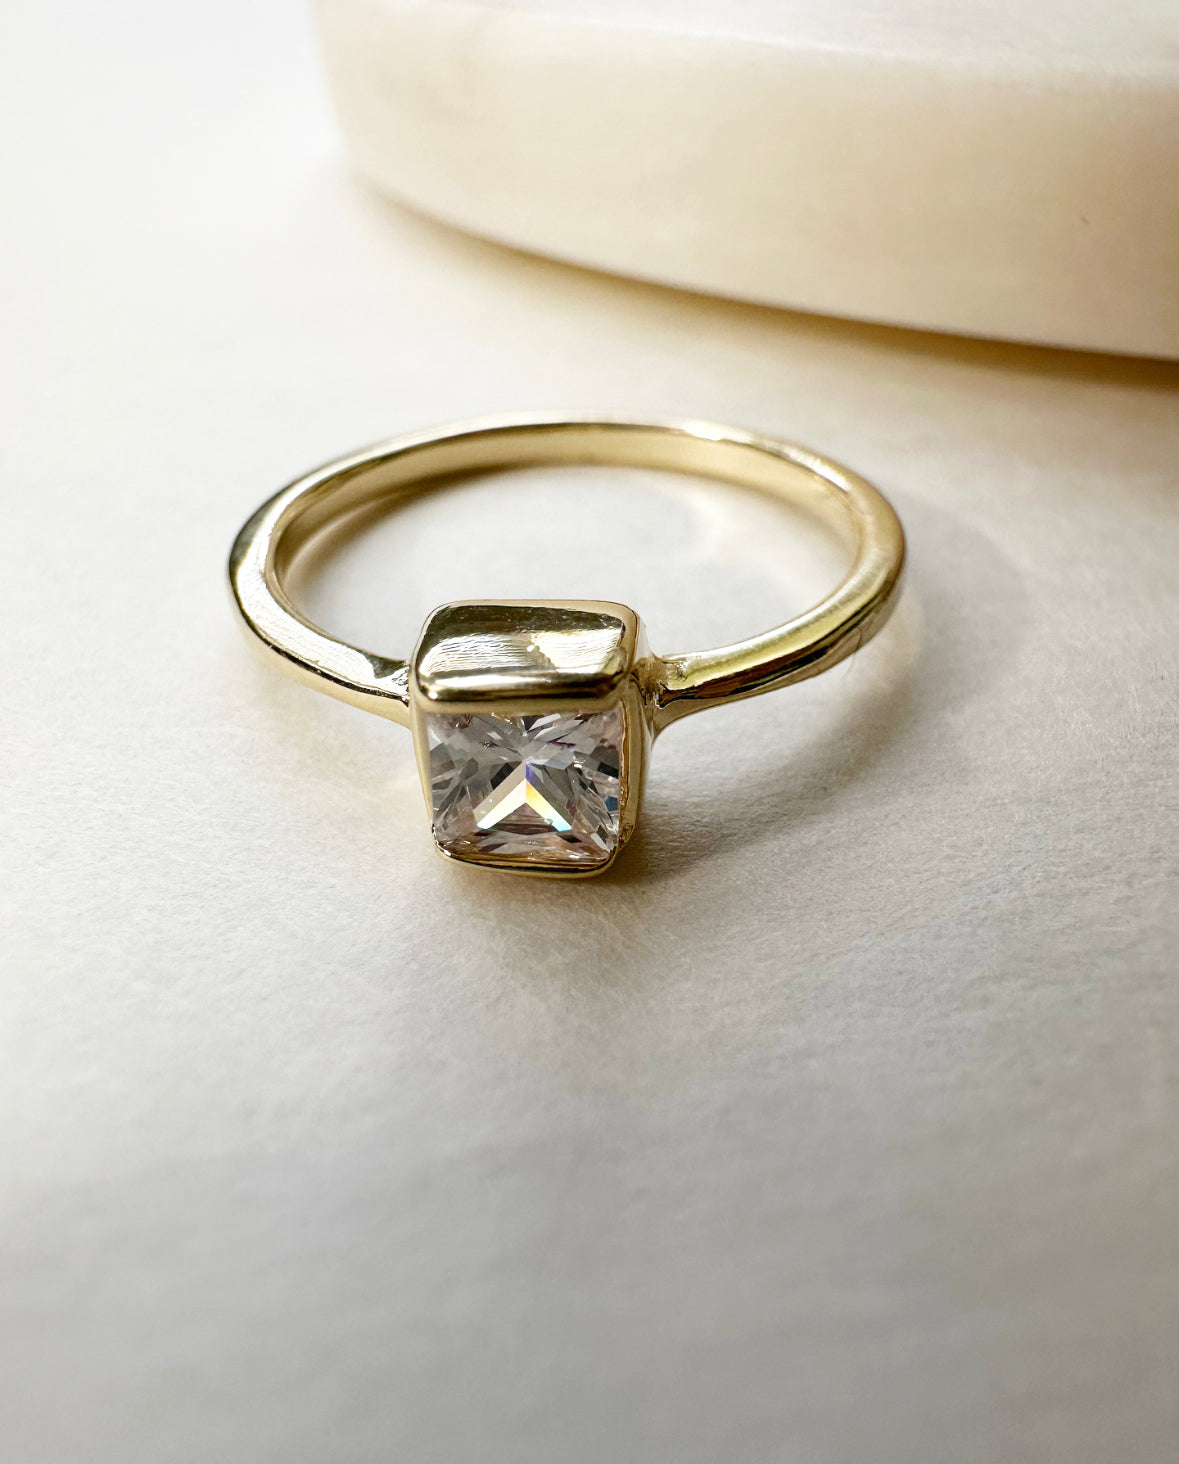 Angel of Mine Ring featuring a square solitaire cubic zirconia stone in an 18k gold-filled bezel setting.